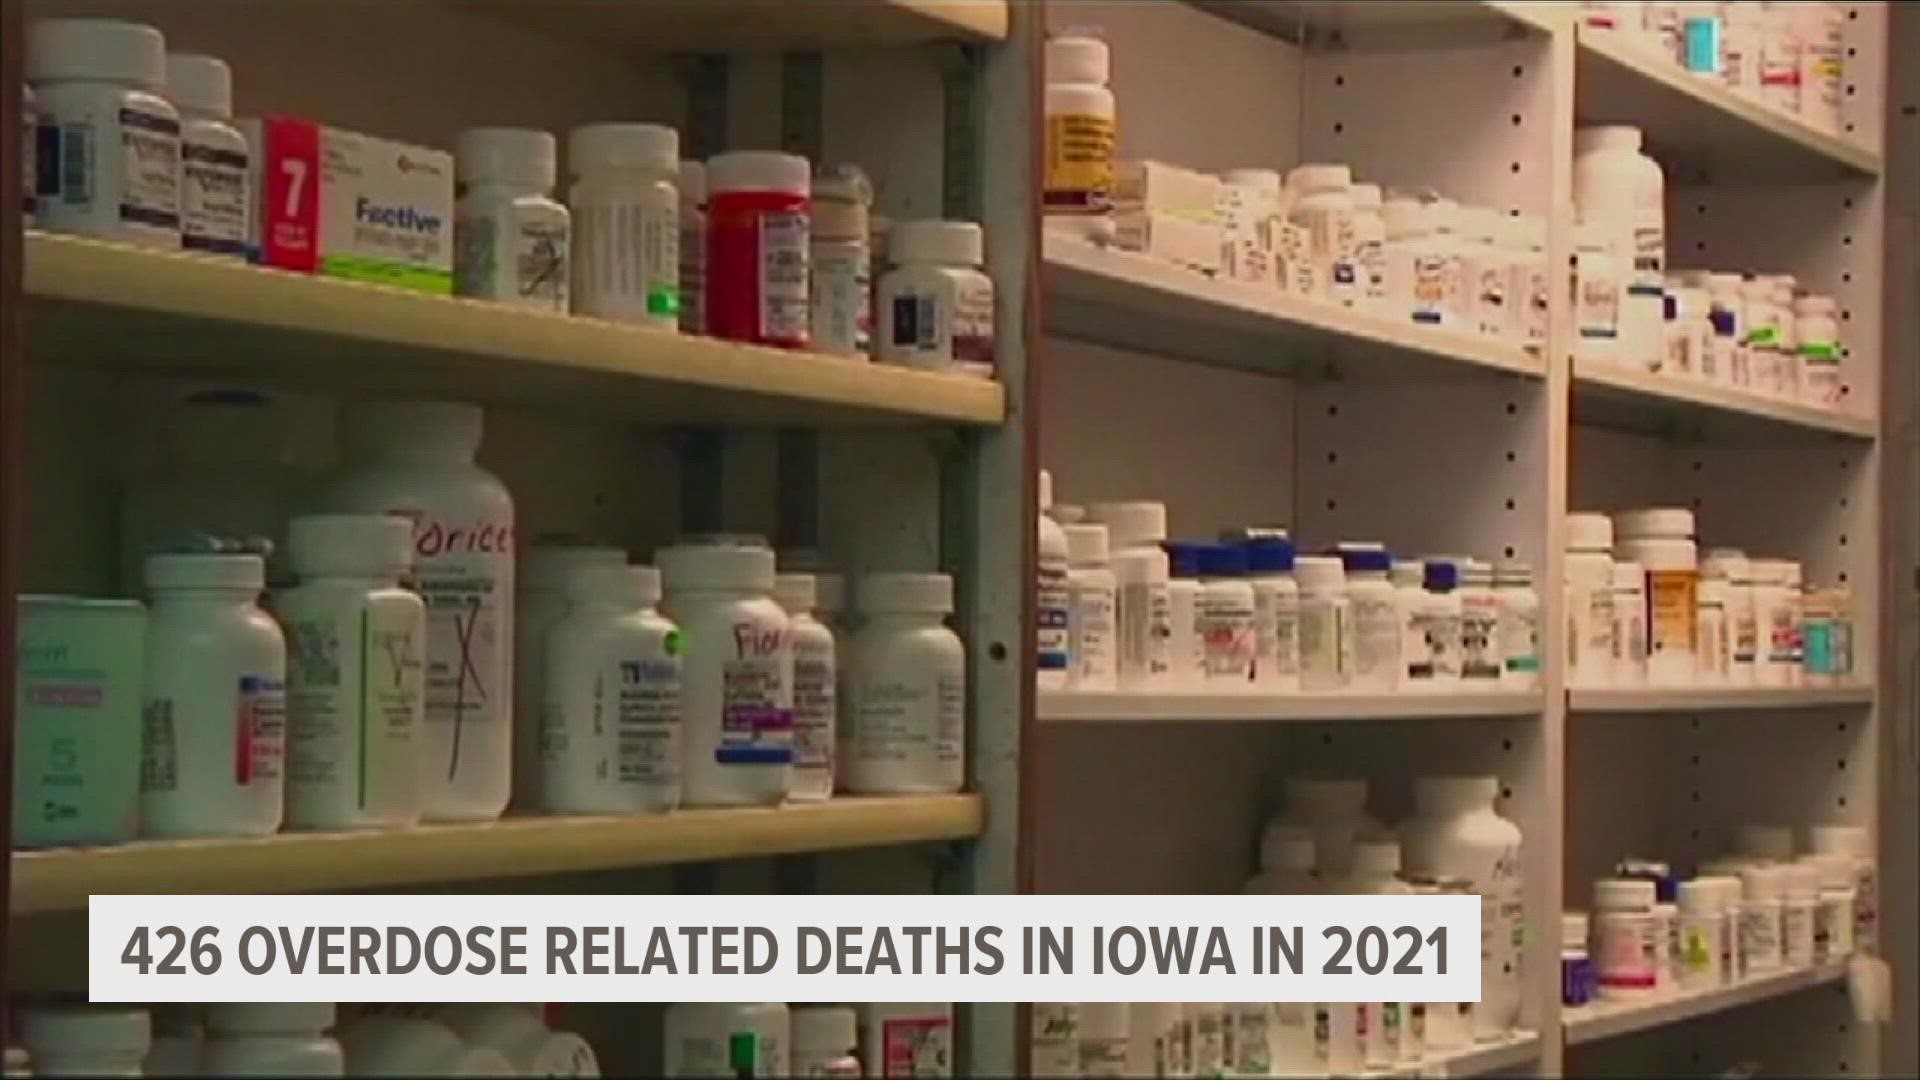 Iowa Attorney General Tom Miller said fentanyl deaths have also increased.